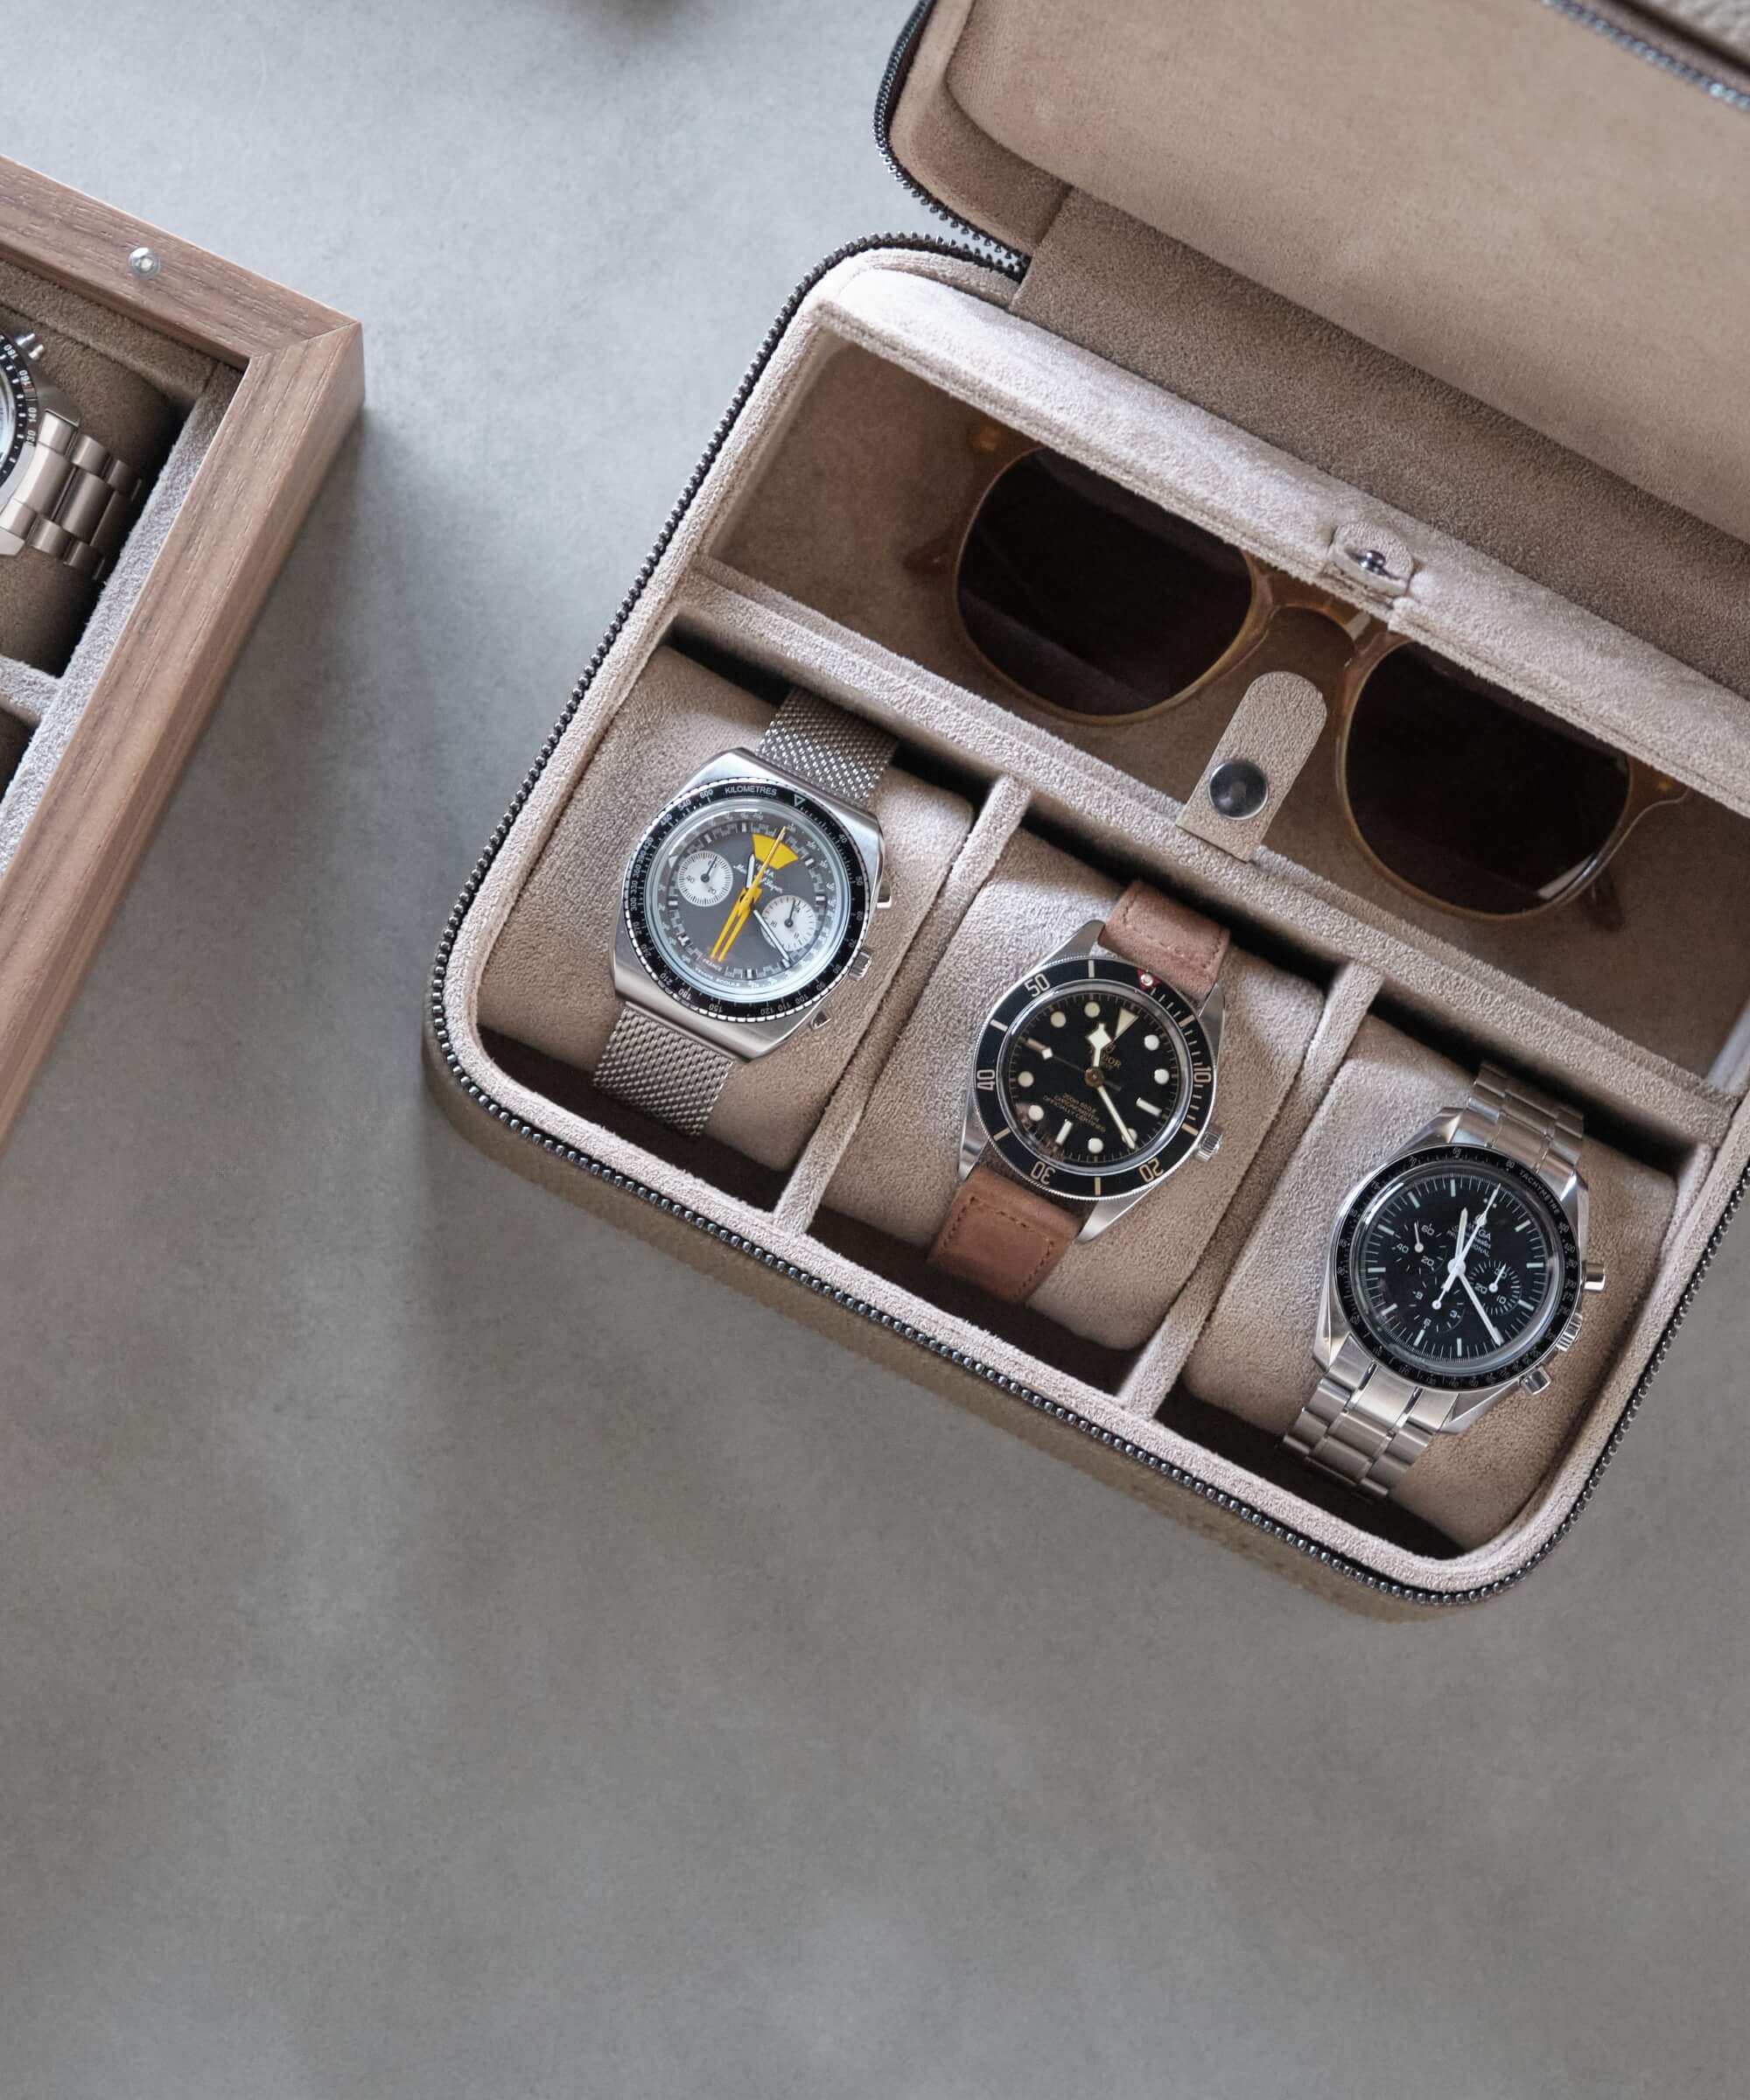 A TAWBURY Fraser 3 Watch Travel Case with Storage - Taupe providing protection for multiple watches.